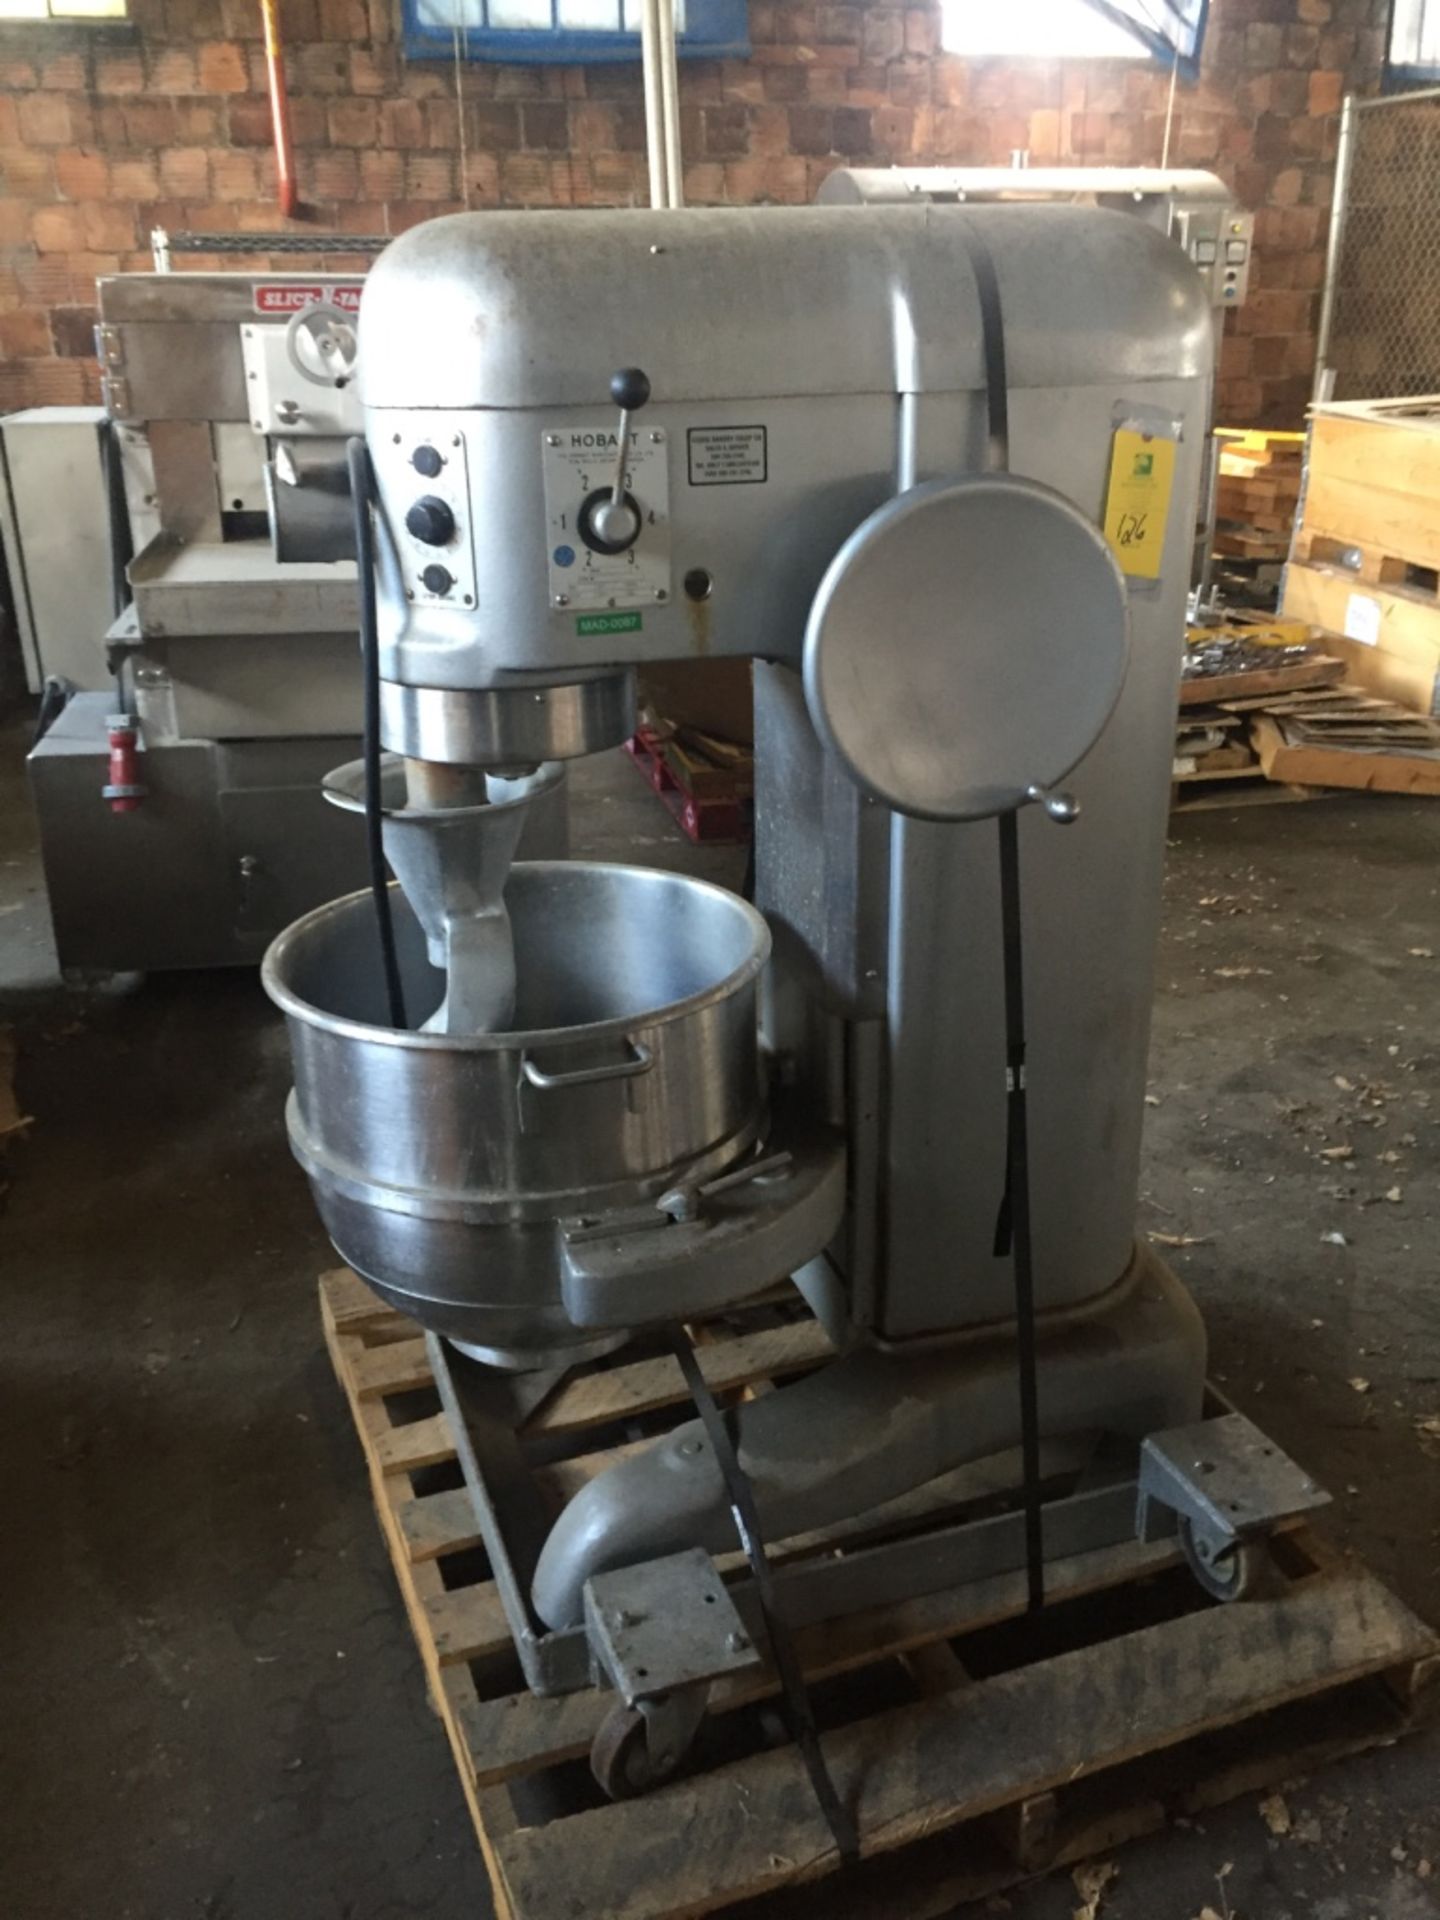 (Located In Madison WI) Hobart Mixer With Bowl And Hook Model L-800 S/N 1503559